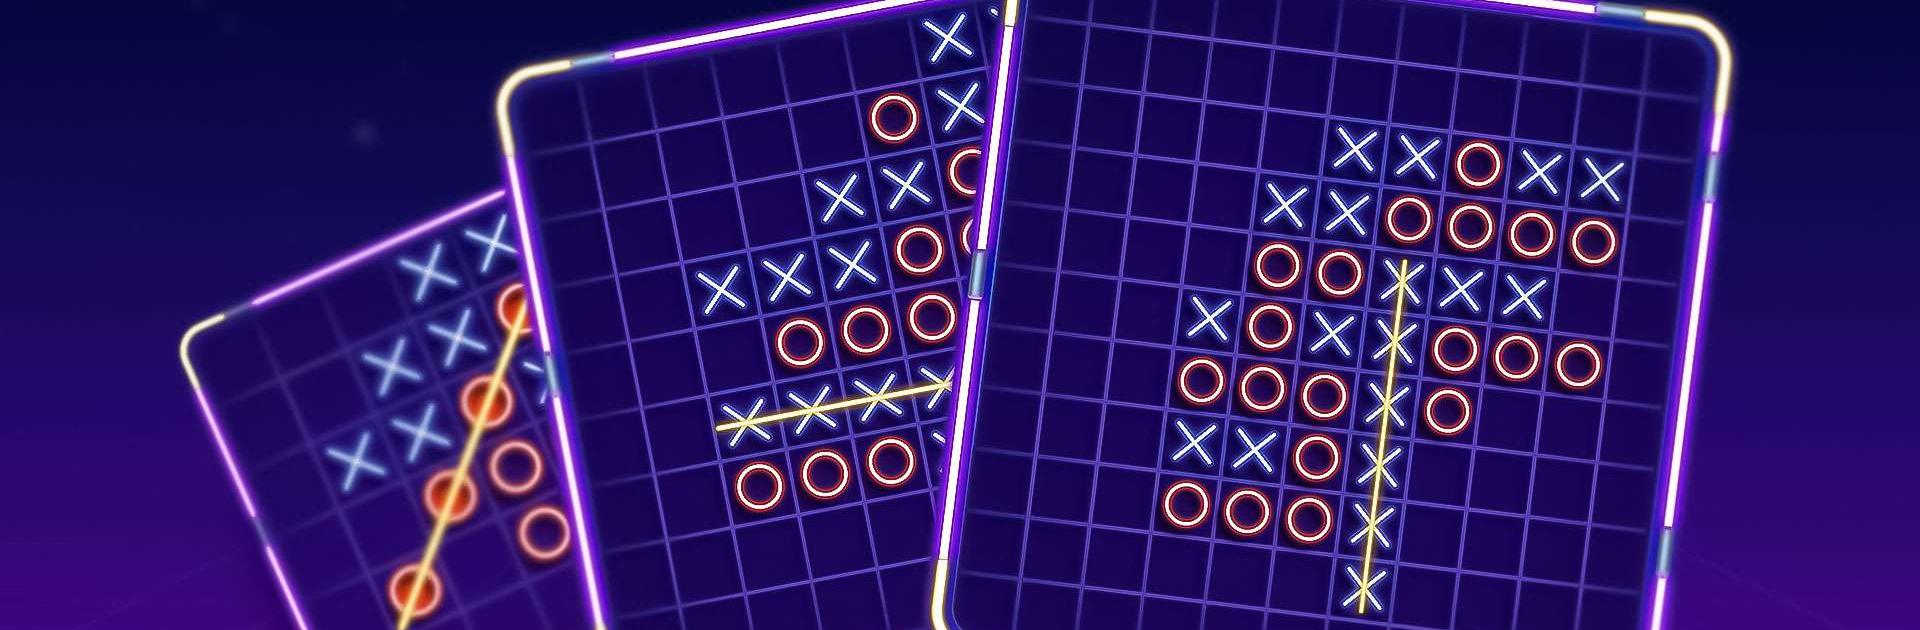 Tic Tac Toe Online puzzle xo - Apps on Google Play